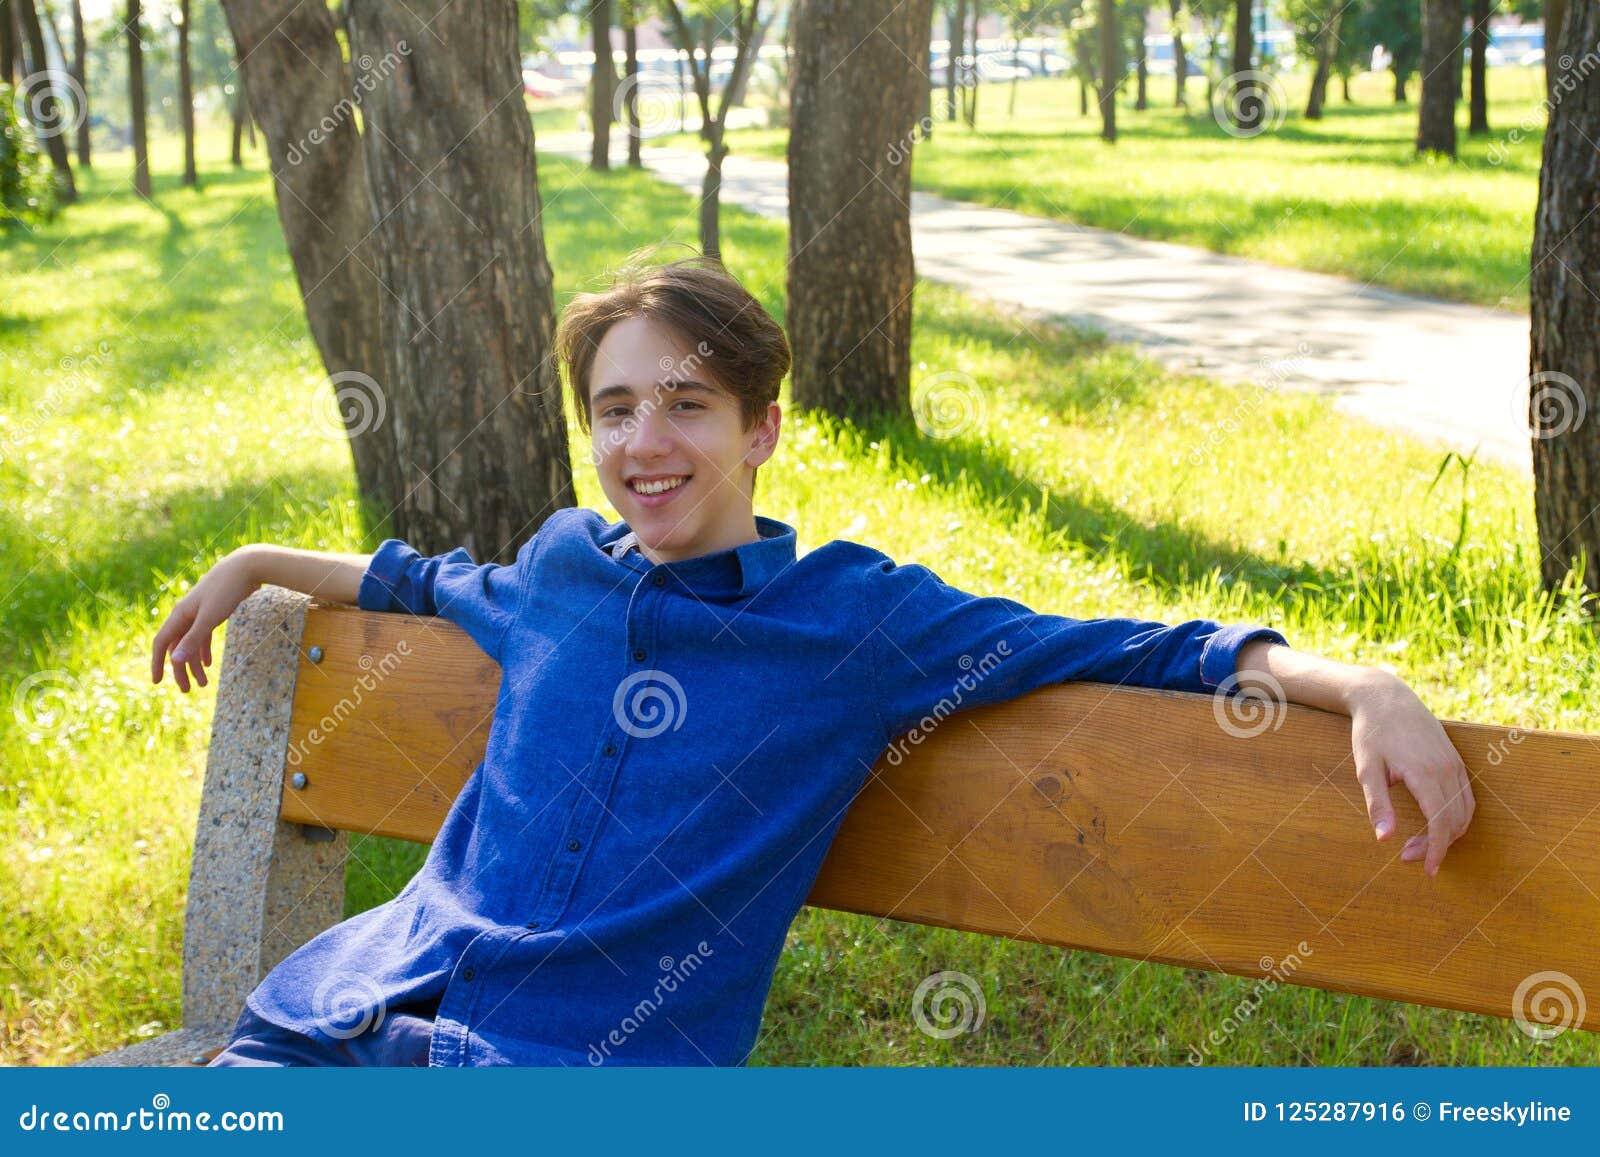 Image result for teenager sitting outside